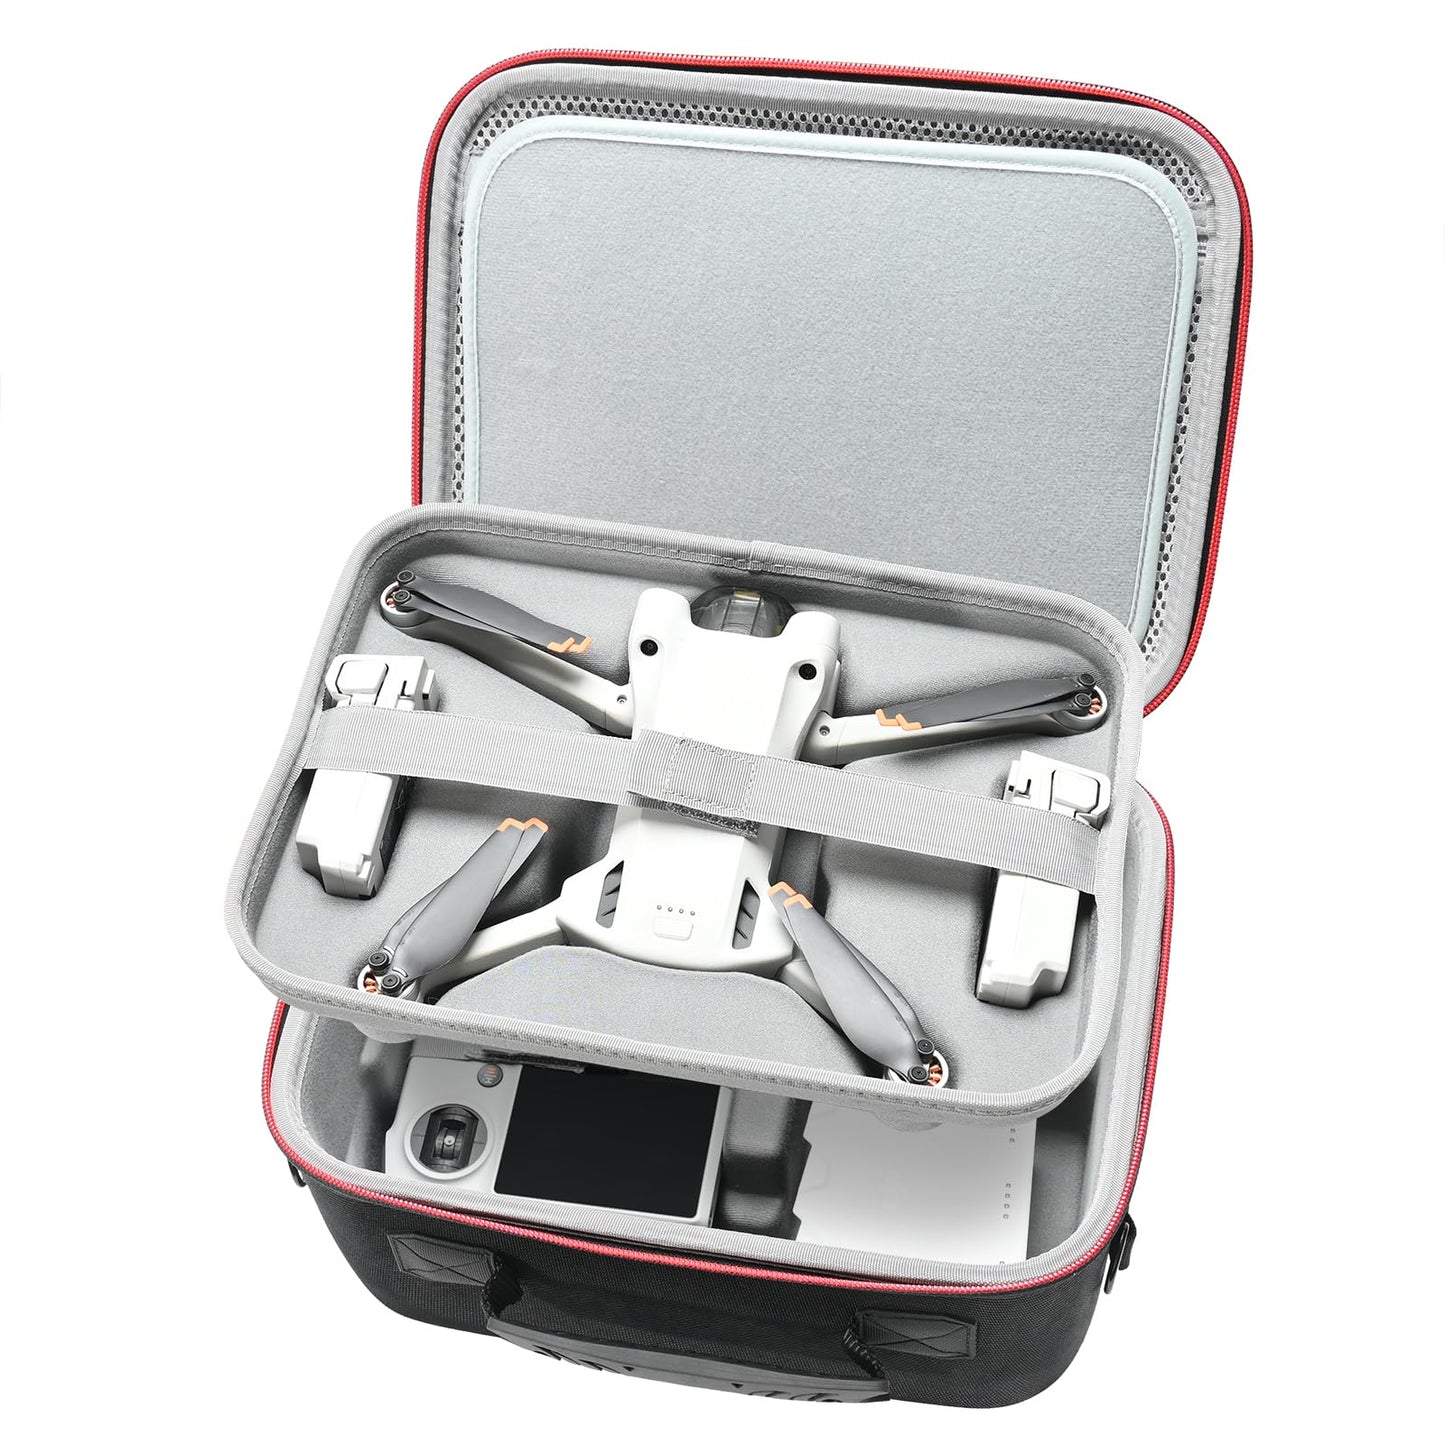 RLSOCO Hard Case for DJI Mini 3 Pro - Fits Full Mini 3 Pro Accessories: Drone Body,RC-N1 or RC Controller,Propellers,Batteries,Cables (Allows Arms Unfold and Fold)